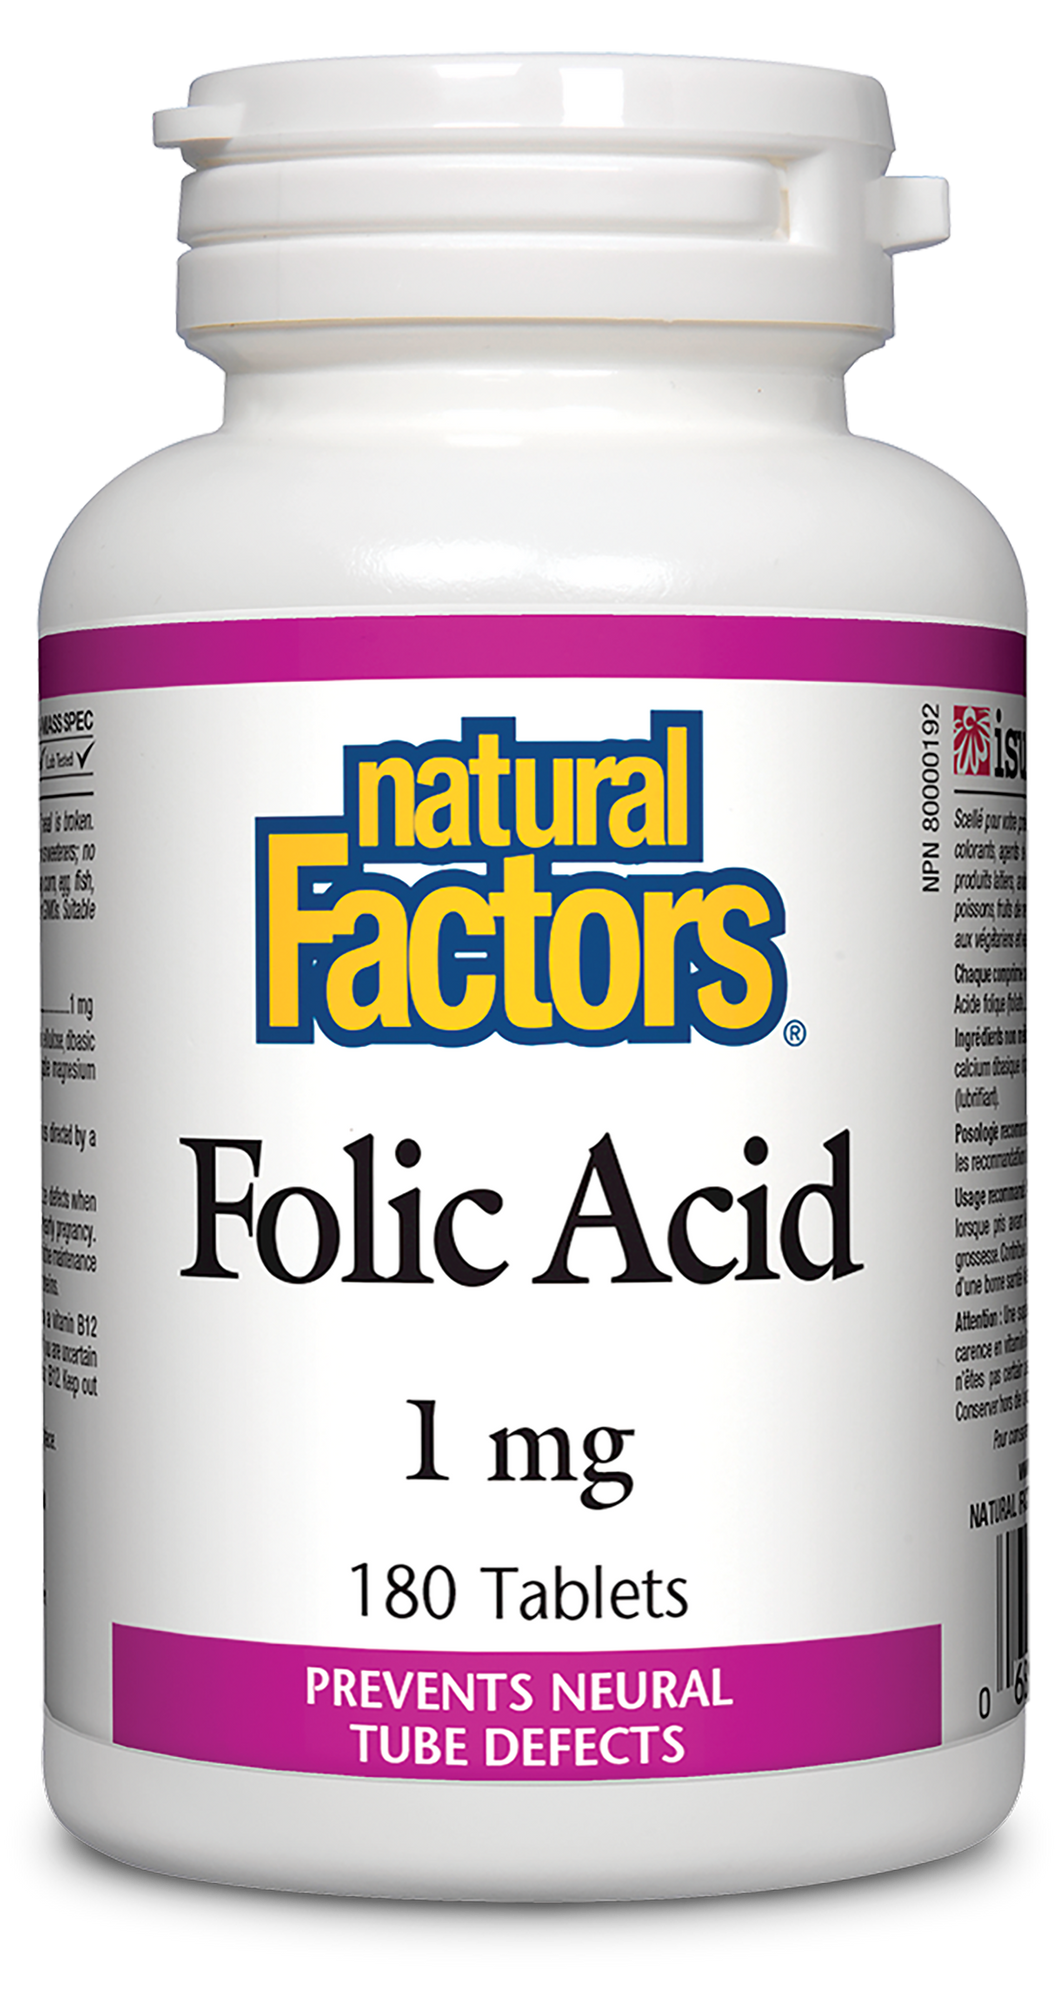 Natural Factors Folic Acid delivers 1 mg of folate per tablet, and is more bioavailable in supplemental form than from food. Folate plays an important role in the prevention of neural tube defects when taken prior to conception and during early pregnancy. It helps in the production of red blood cells and factors in the maintenance of good health. 